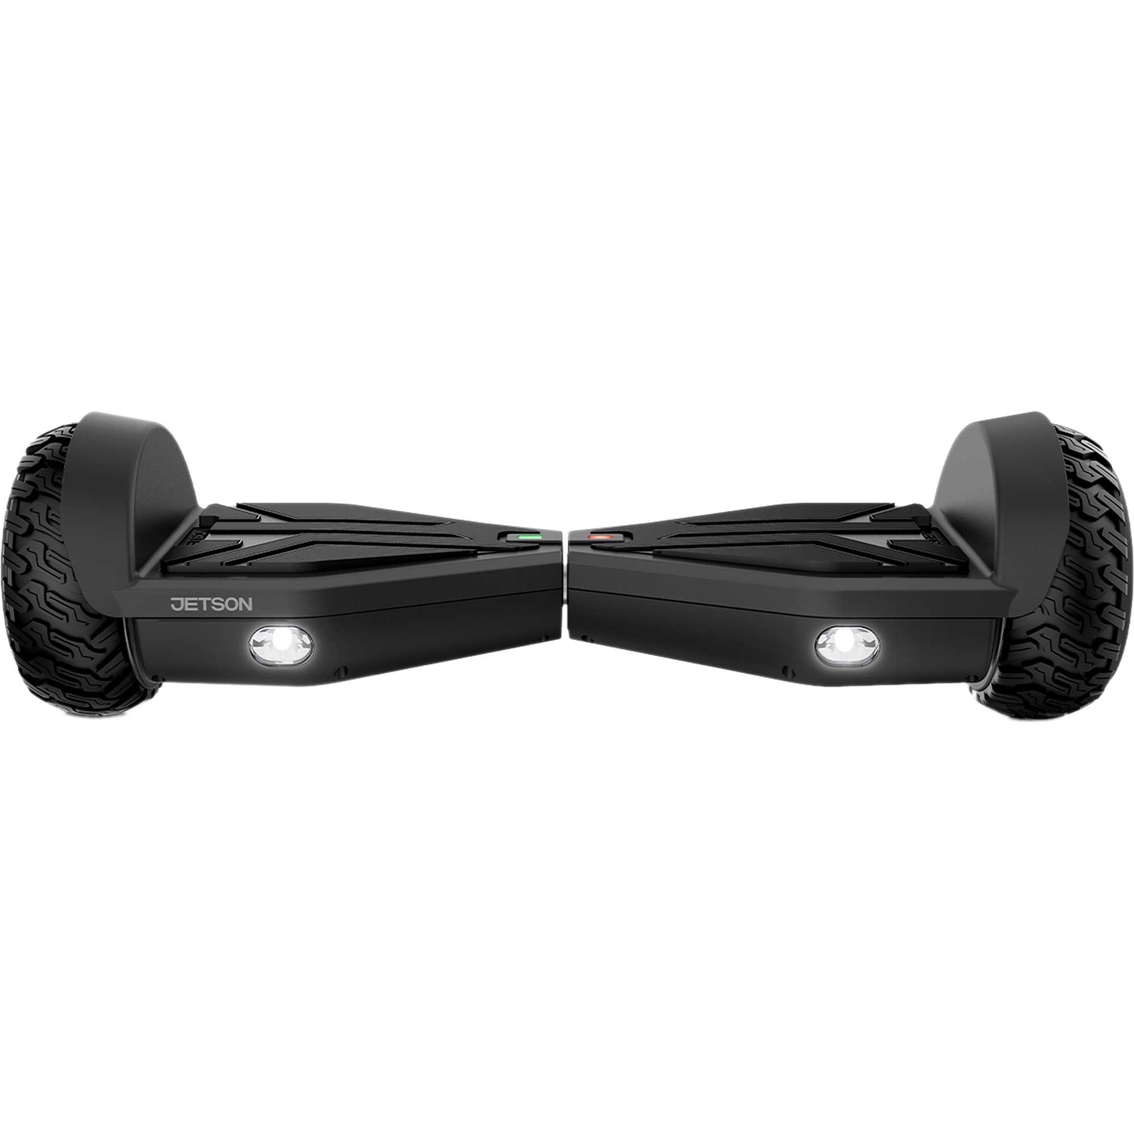 Jetson Aero Hoverboard with LED Lights - Image 2 of 9